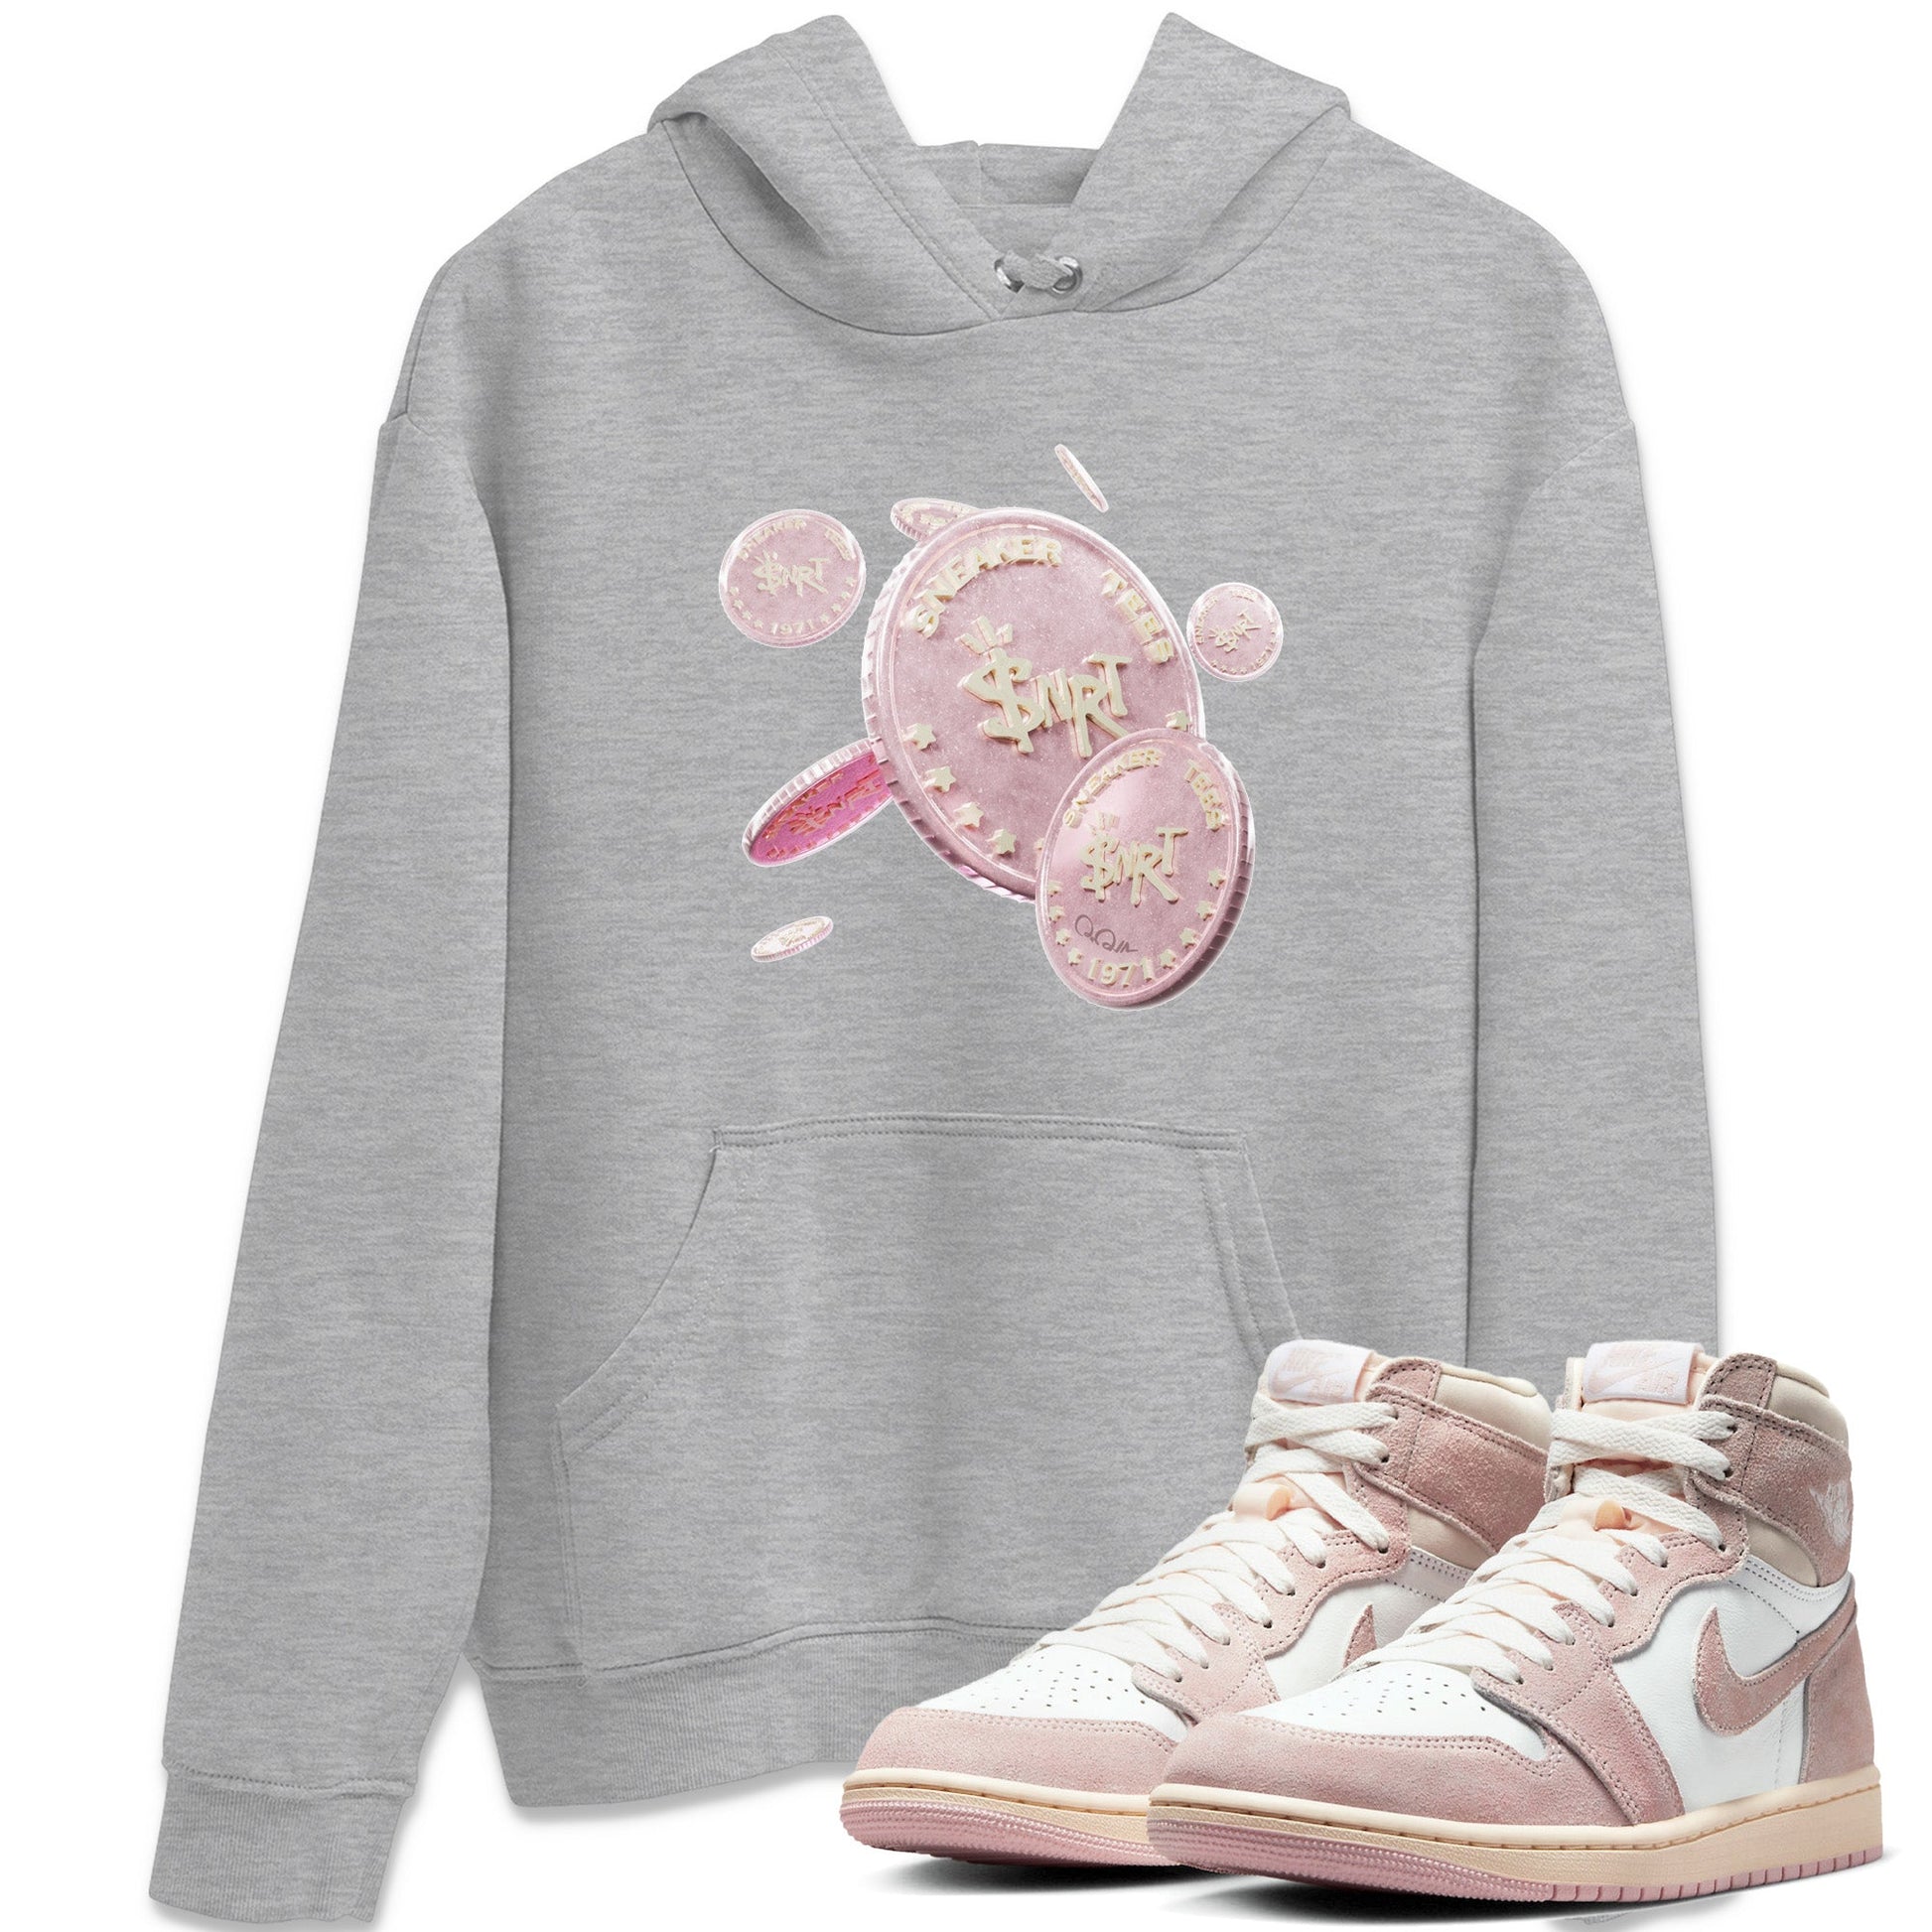 AJ1 Retro High OG Washed Pink Sneaker Match Tees Coin Drop Sneaker Tees AJ1 Retro High OG Washed Pink Sneaker Release Tees Unisex Shirts Heather Grey 1